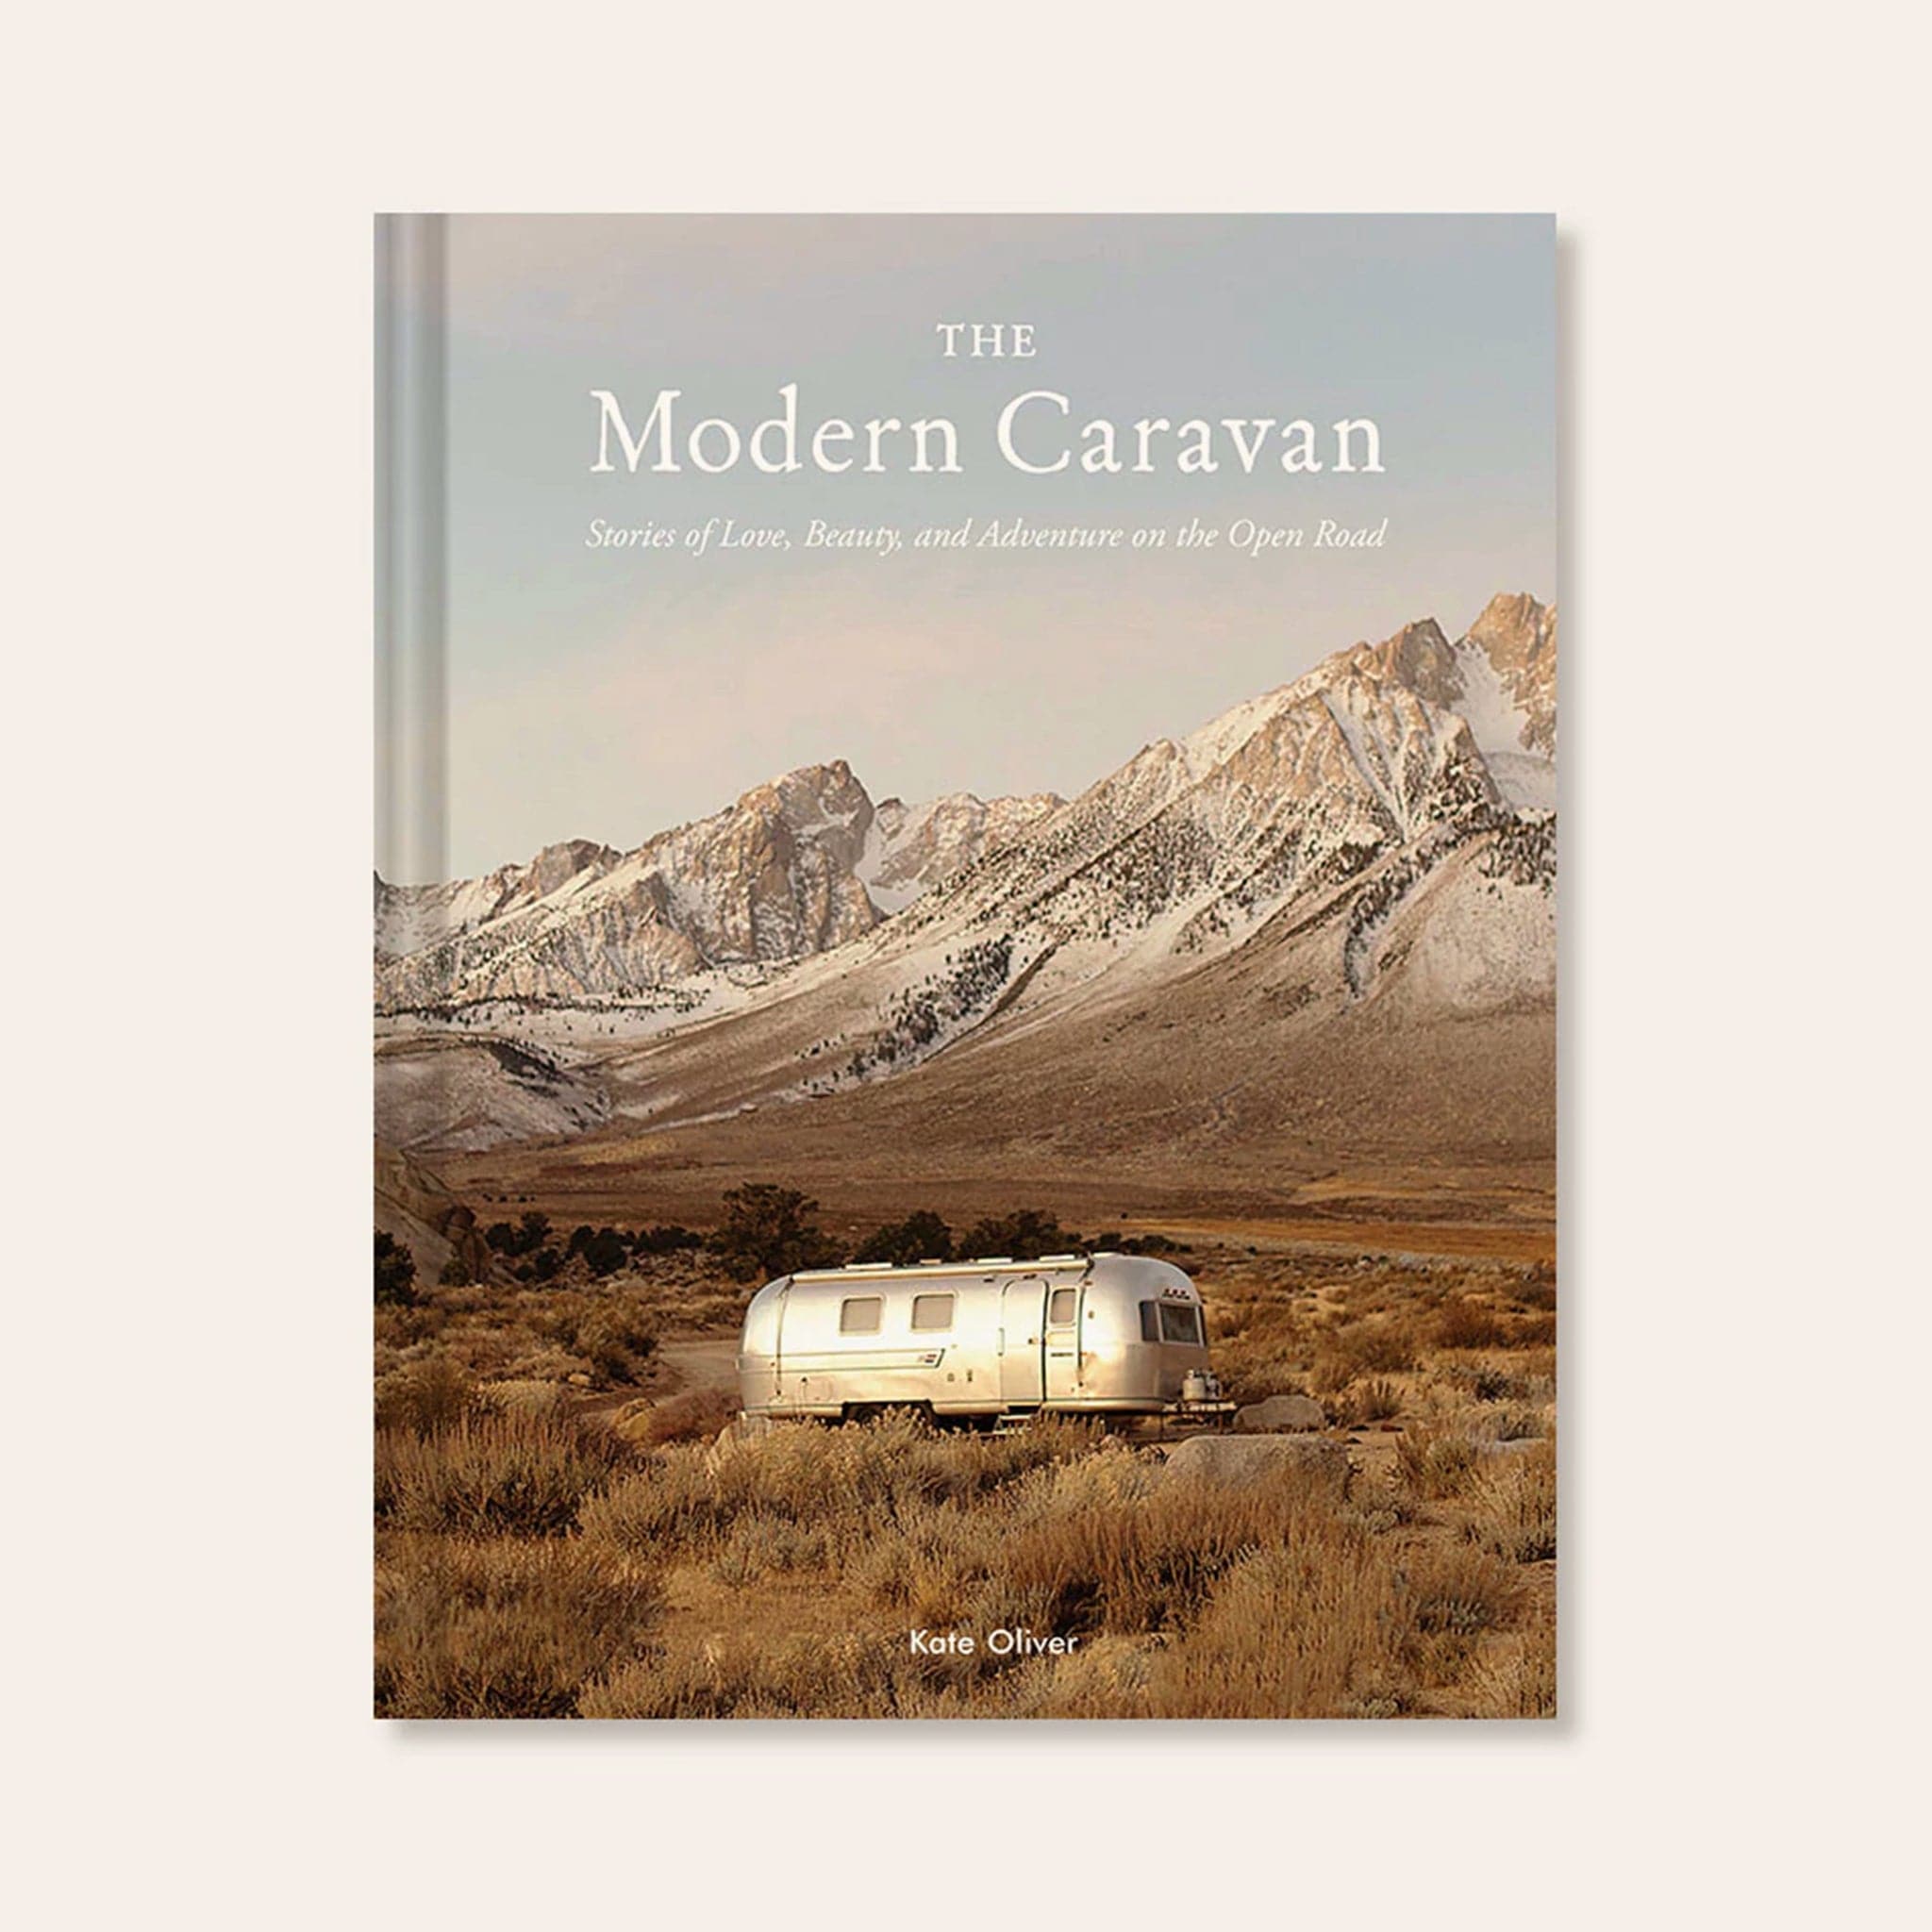 Hard cover of travel book titled &#39;The Modern Caravan, stories of love, beauty, and adventure on the open road&#39; in white pressed lettering. Behind the title is a cool toned mountain scene. Below the mountains sits a silver airstream trailer amidst an open valley.